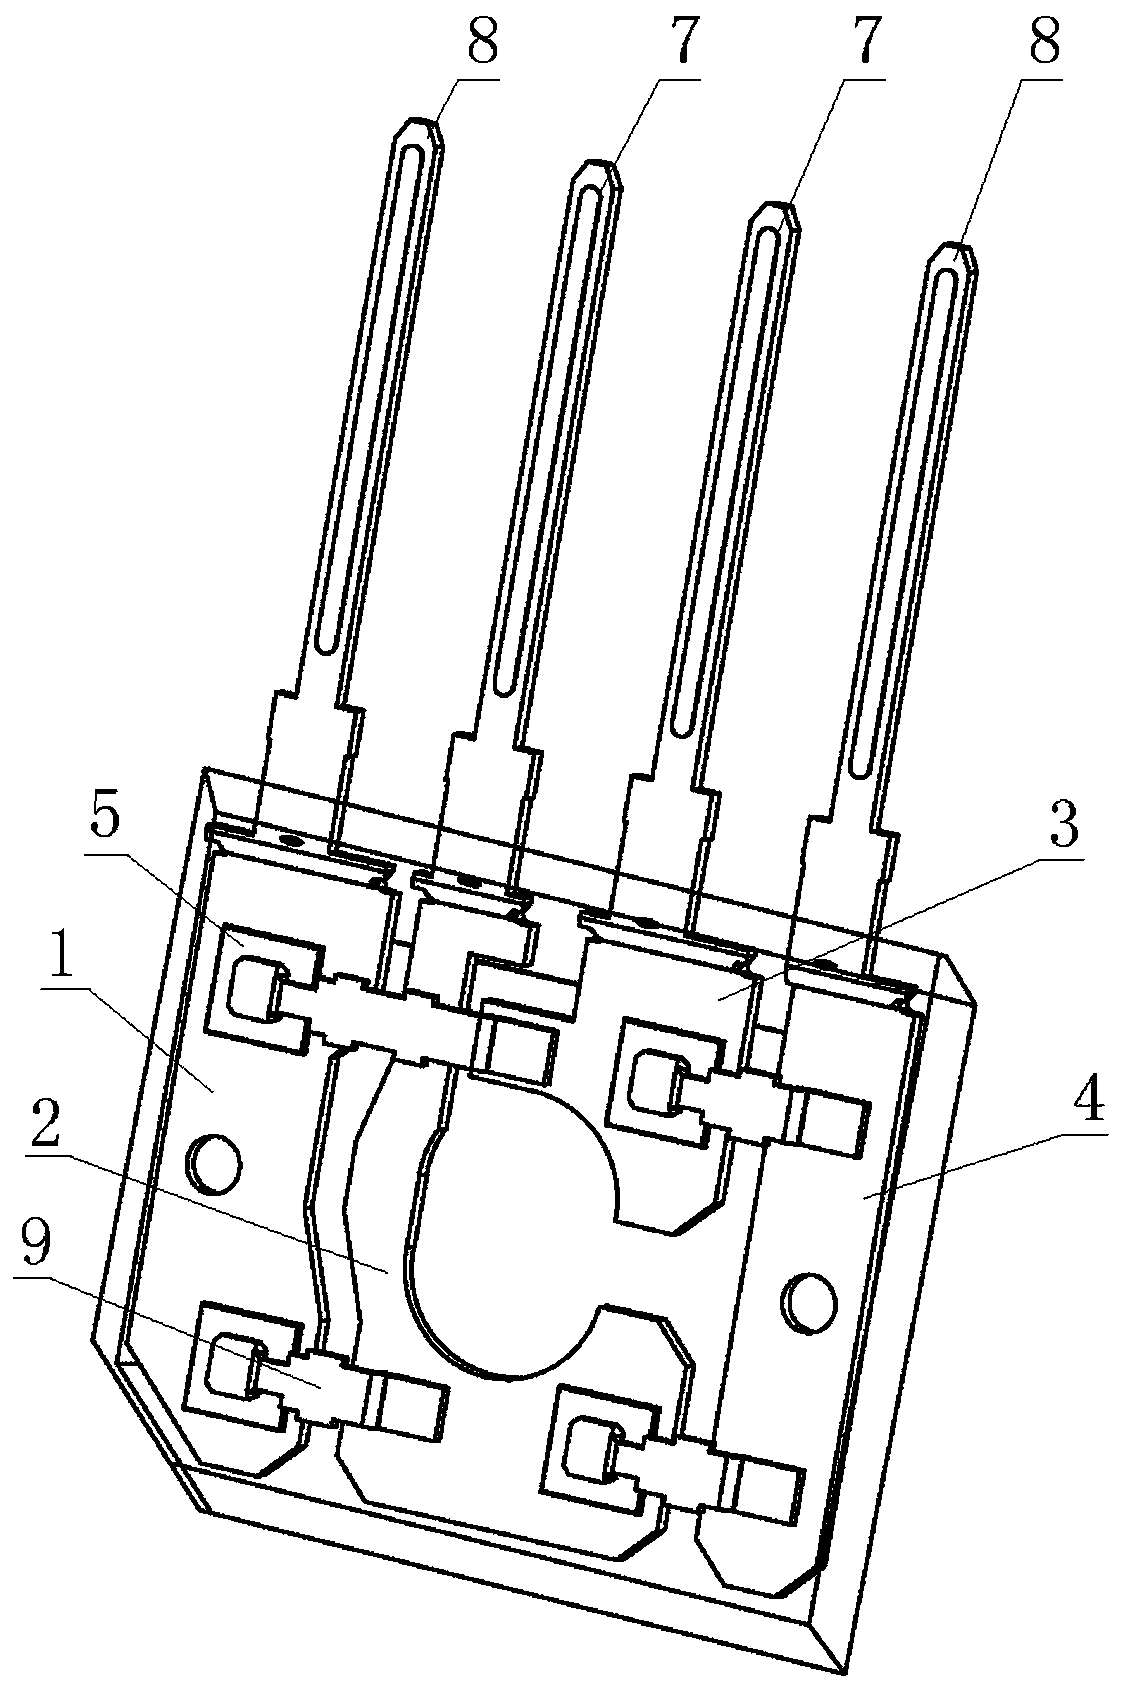 Direct-insertion rectification bridge device with output protection